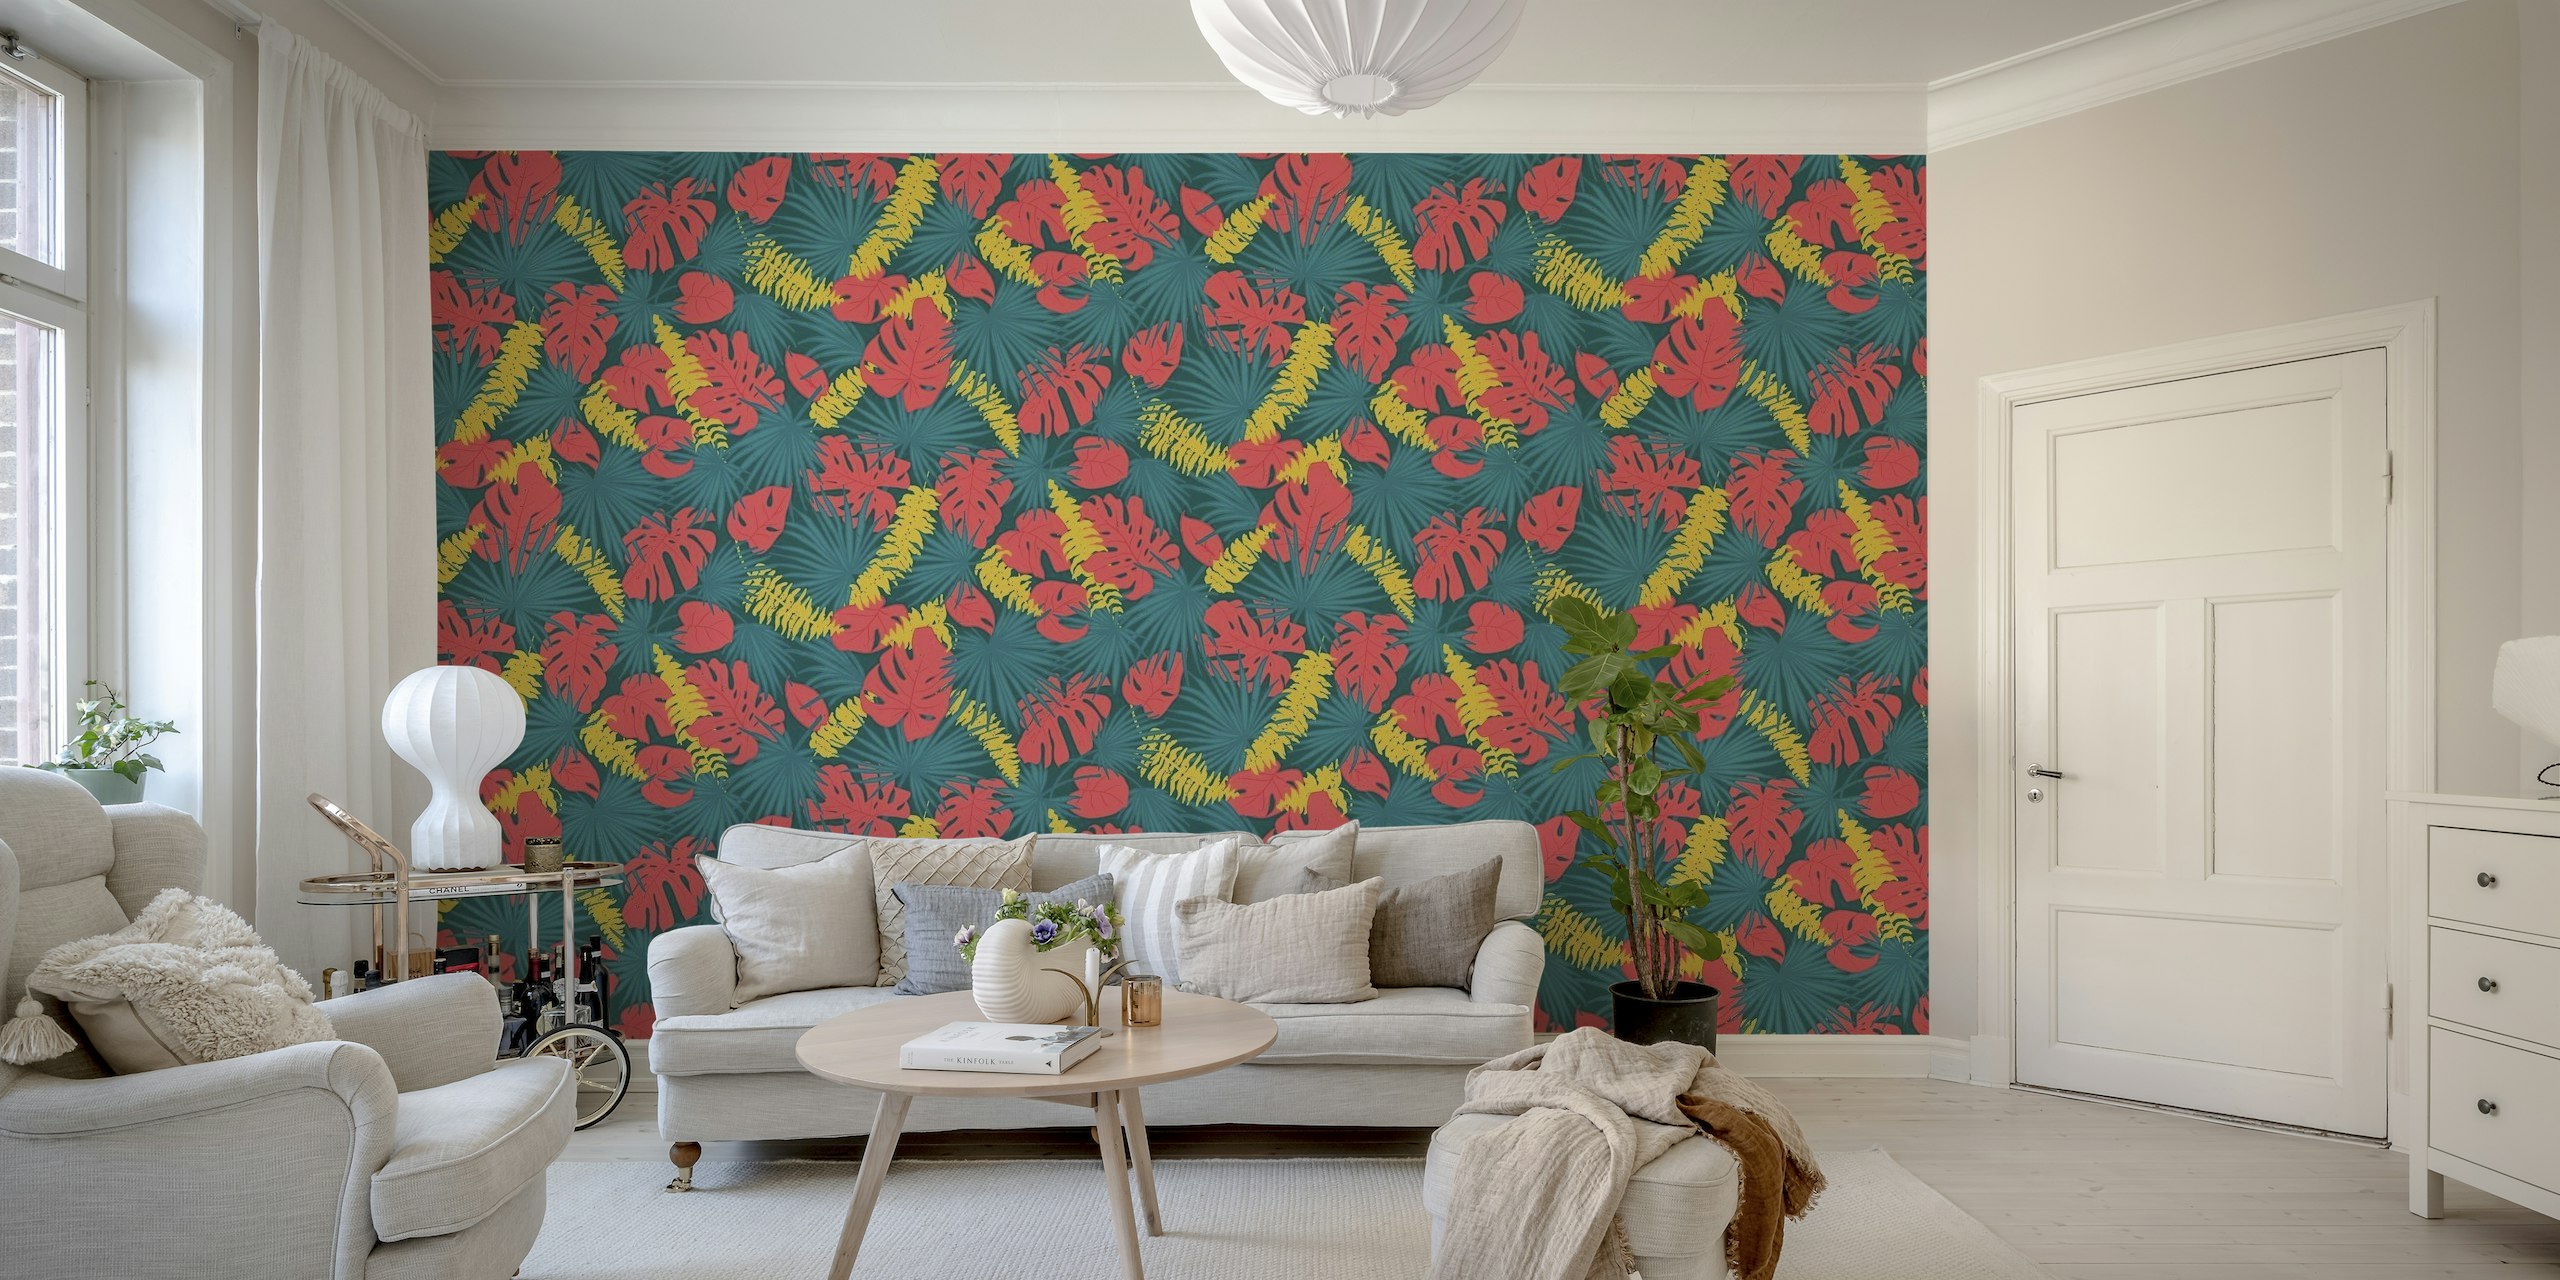 Into The Jungle - Giant Blue - Tropical leaf print with monstera, palm and fern papel pintado